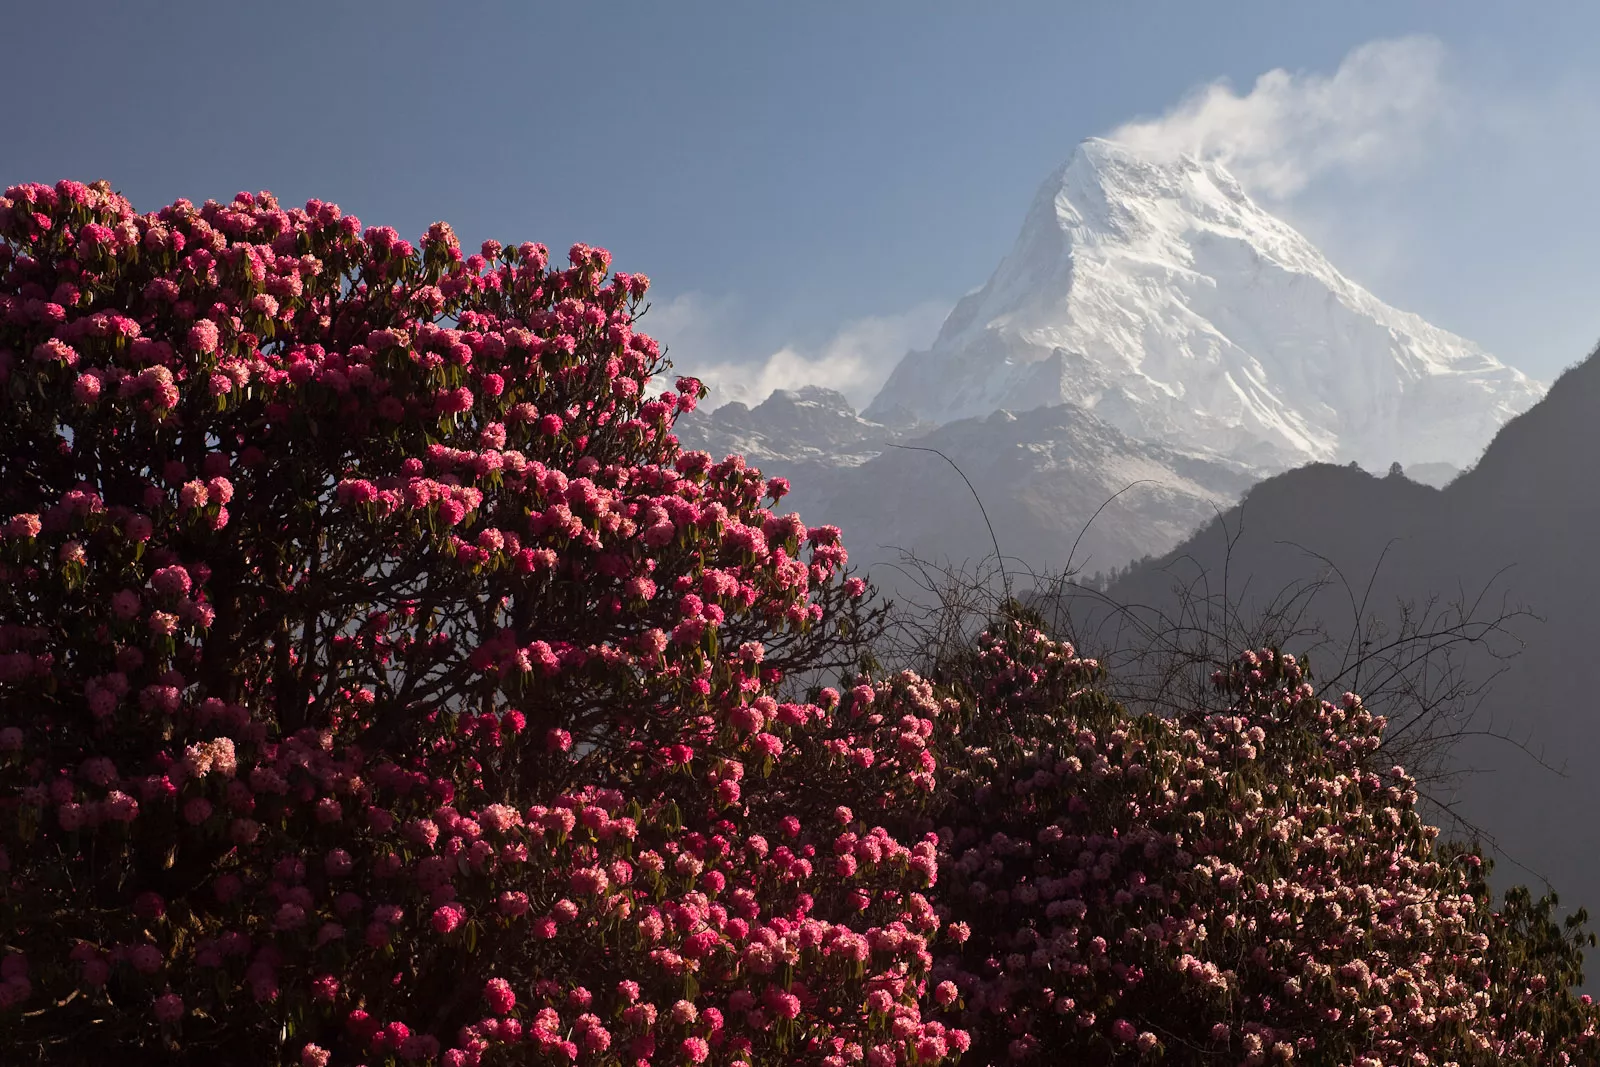 Barsey Rhododendron Sanctuary offers the magnificent view of the Mount Kanchendzongna